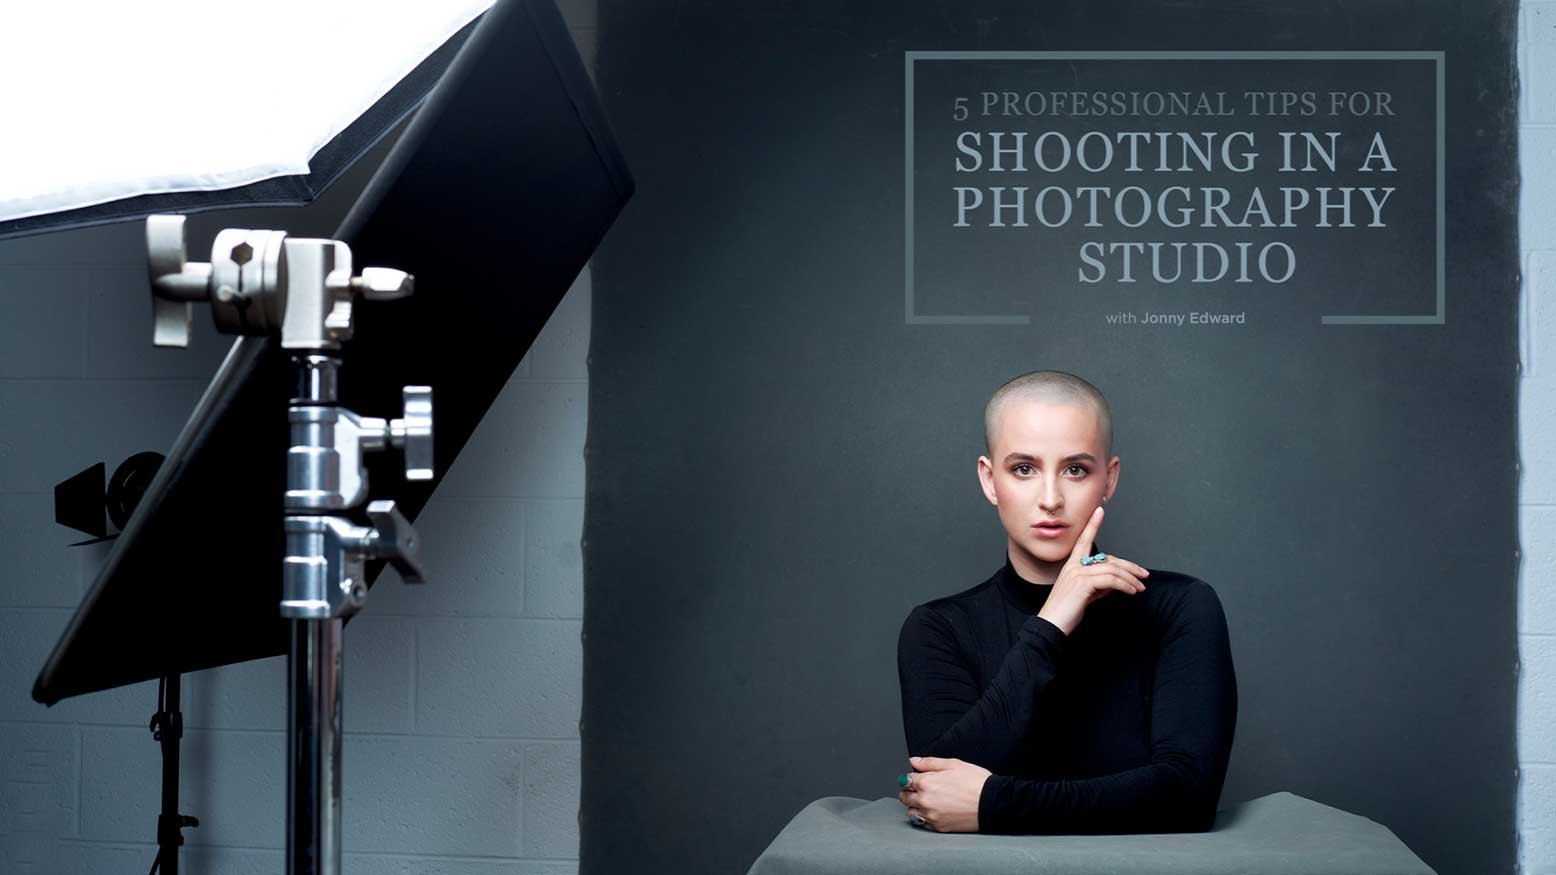 Shooting in a Photography Studio